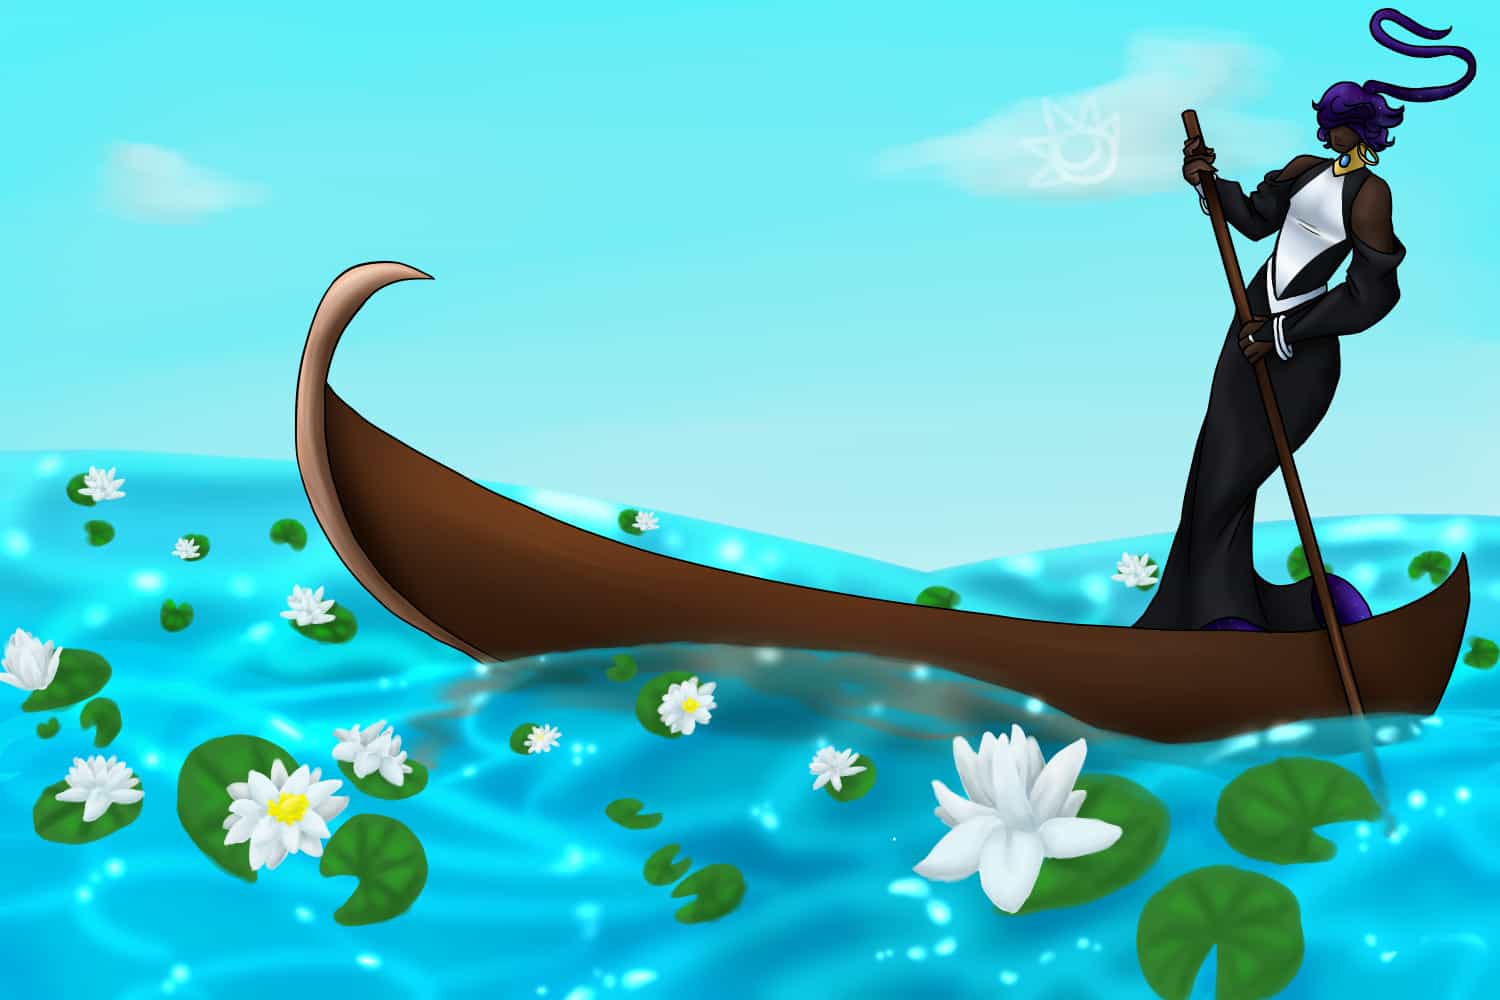 A man on a gondala in a lake full of lilies.